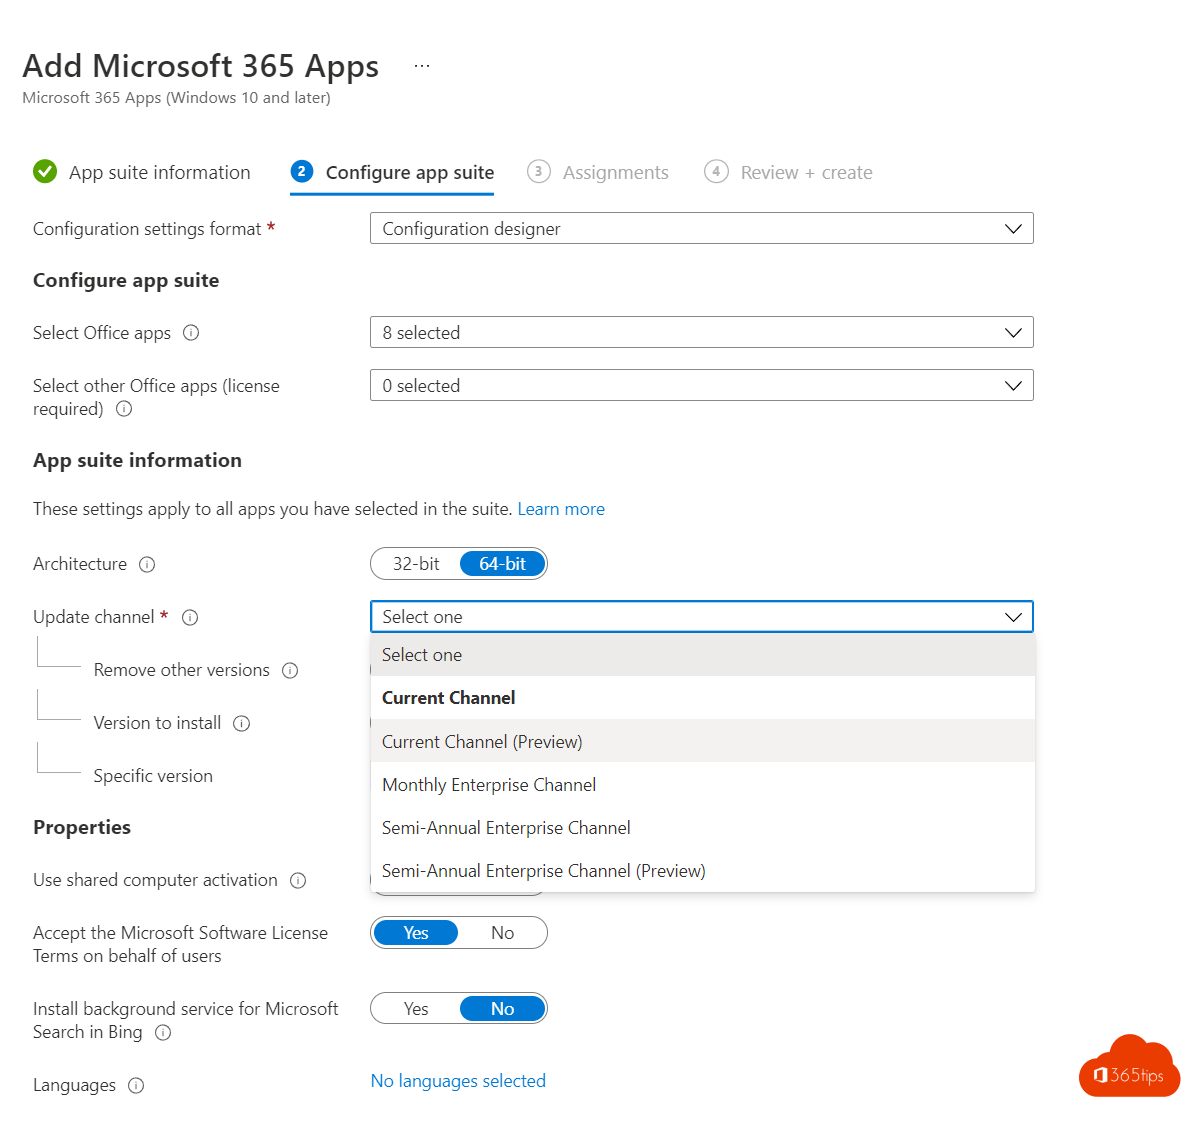 Rolling out Microsoft 365 Apps with Microsoft Intune in 8 steps